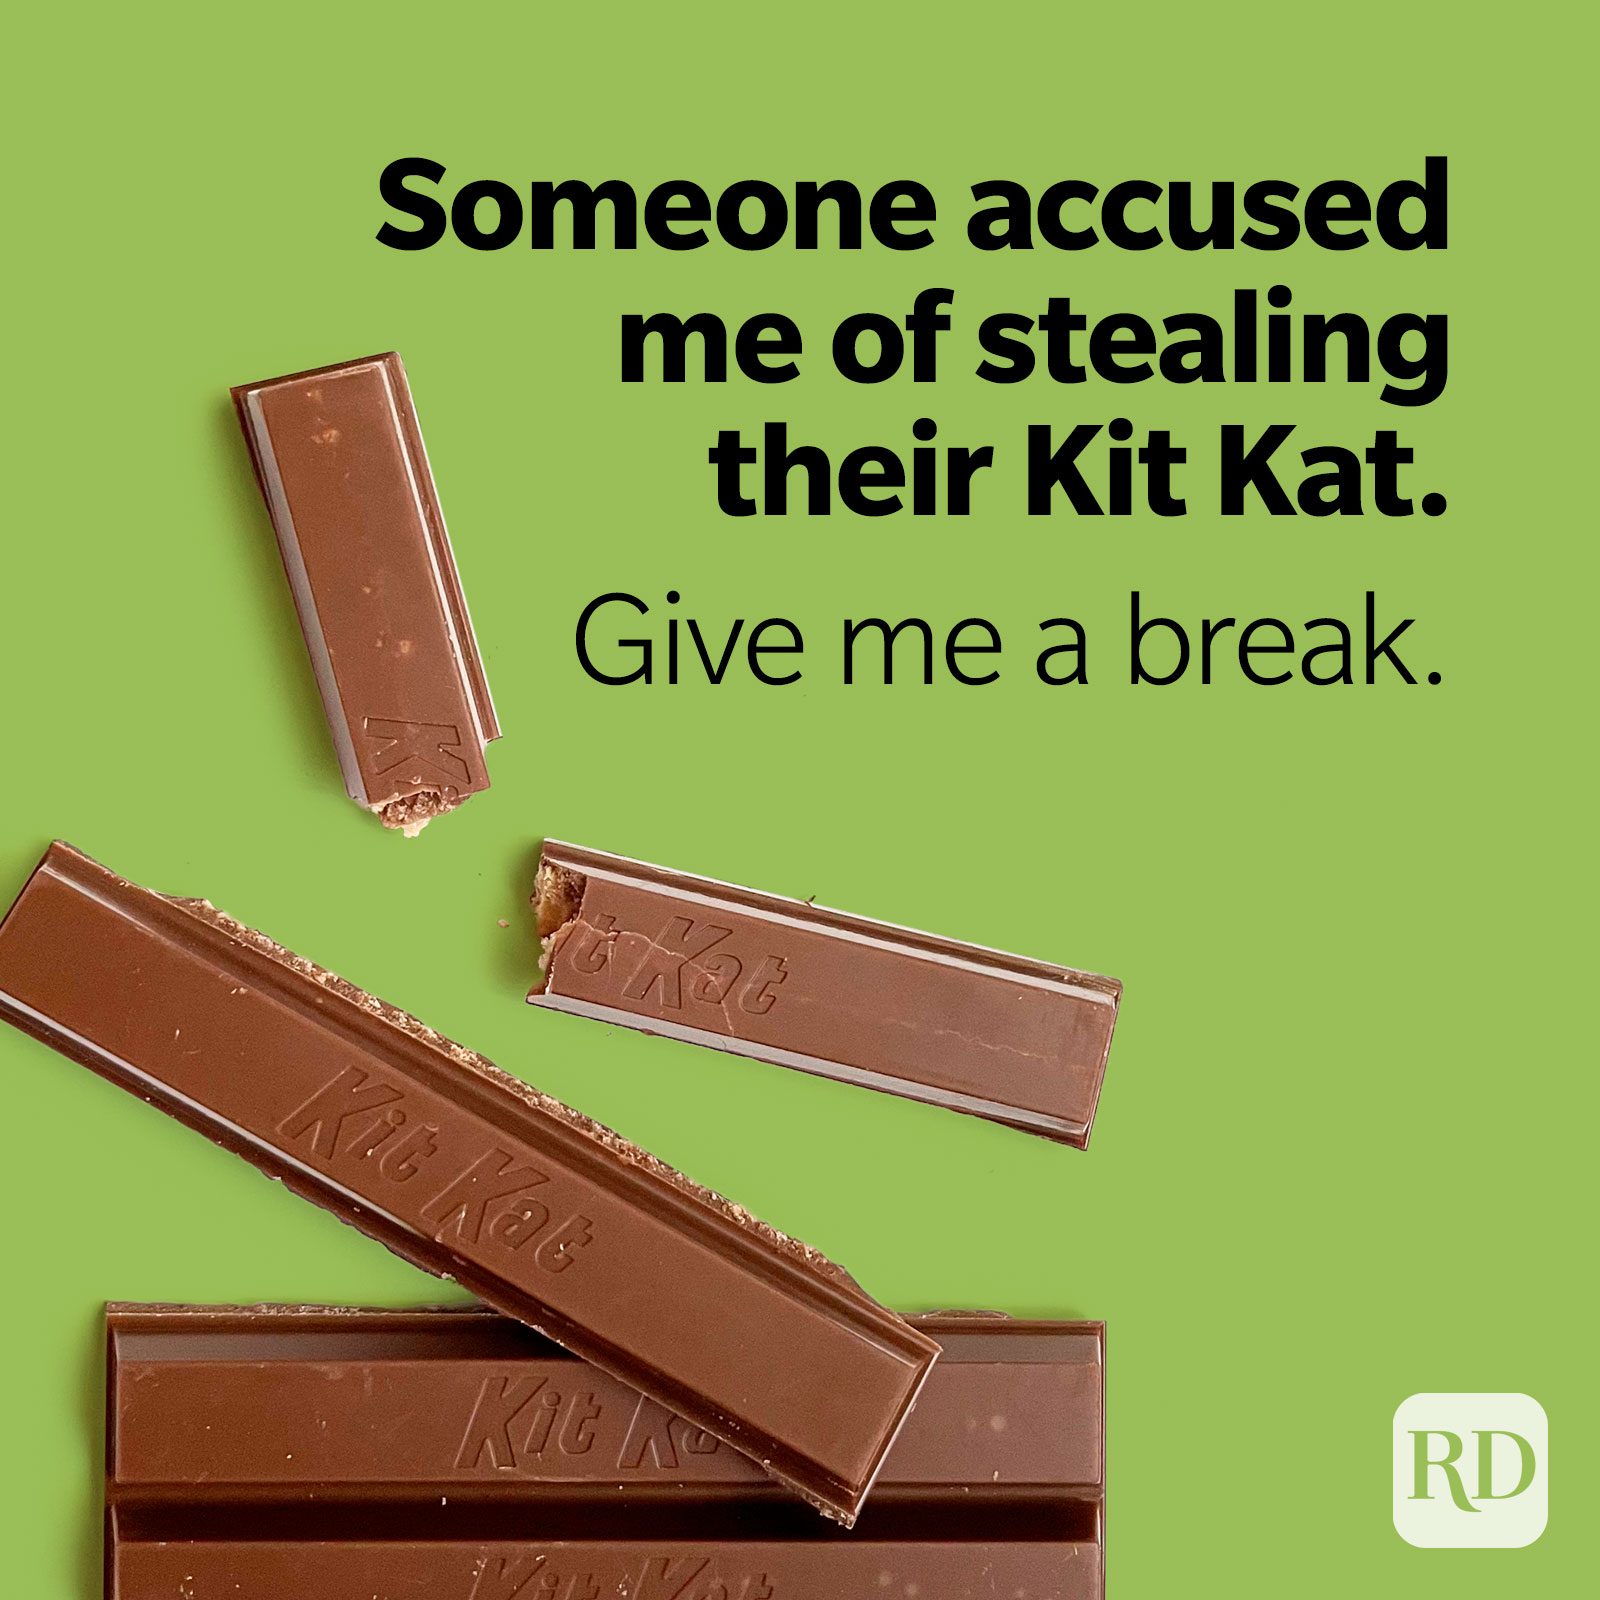 Someone accused me of stealing their Kit Kat. Give me a break.